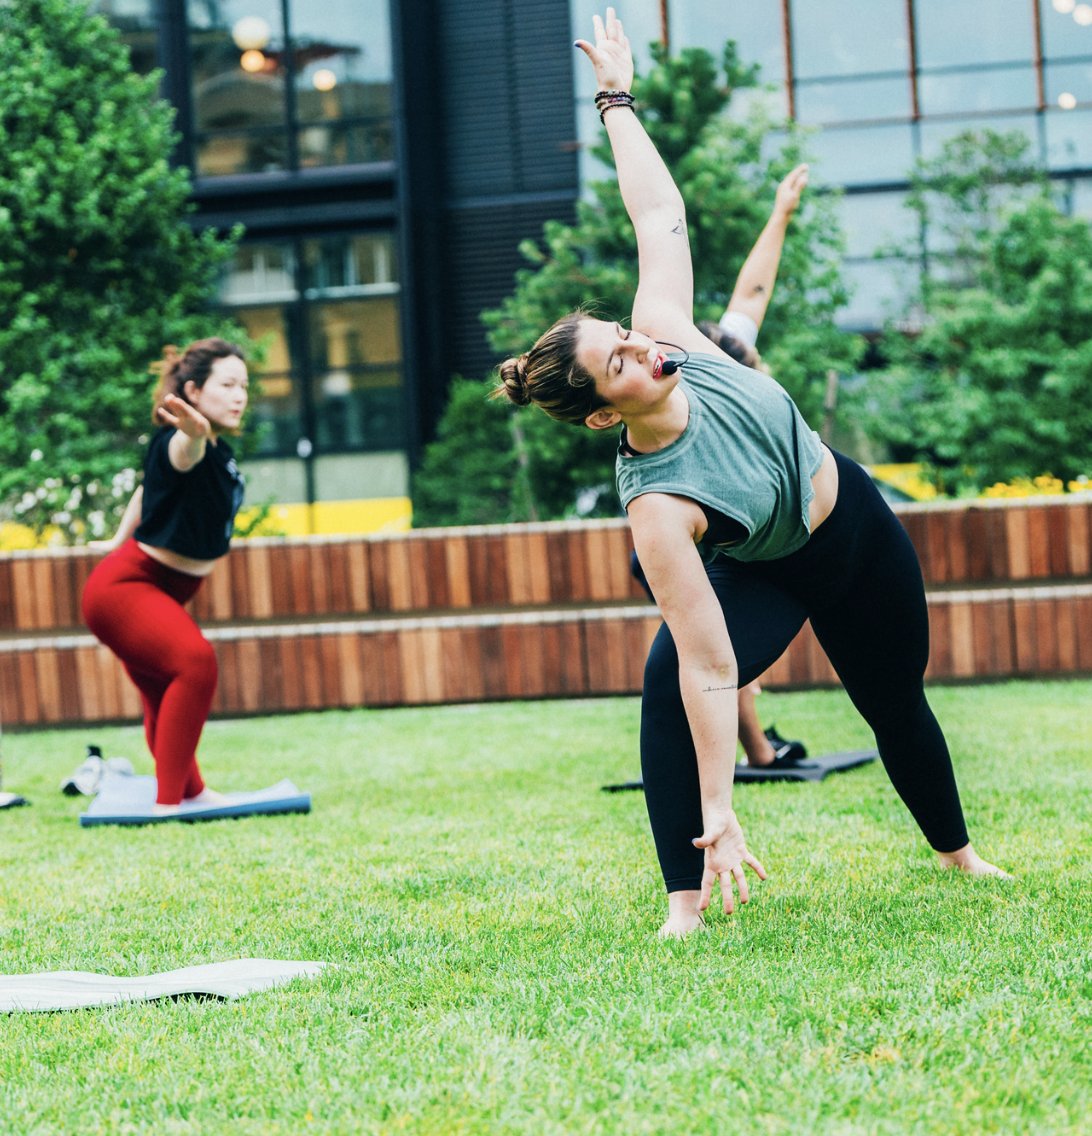 💪 Fit @ Met returns April 10! 🏋️‍♀️ Join us every Wednesday from 8 to 9 A.M. for our series of FREE, instructor-led fitness classes. 🏃‍♂️ No experience? No worries! Just pick your class, register for free, and dive into the fun! 🔗 Register now: bit.ly/4ahjOqL #MetPark